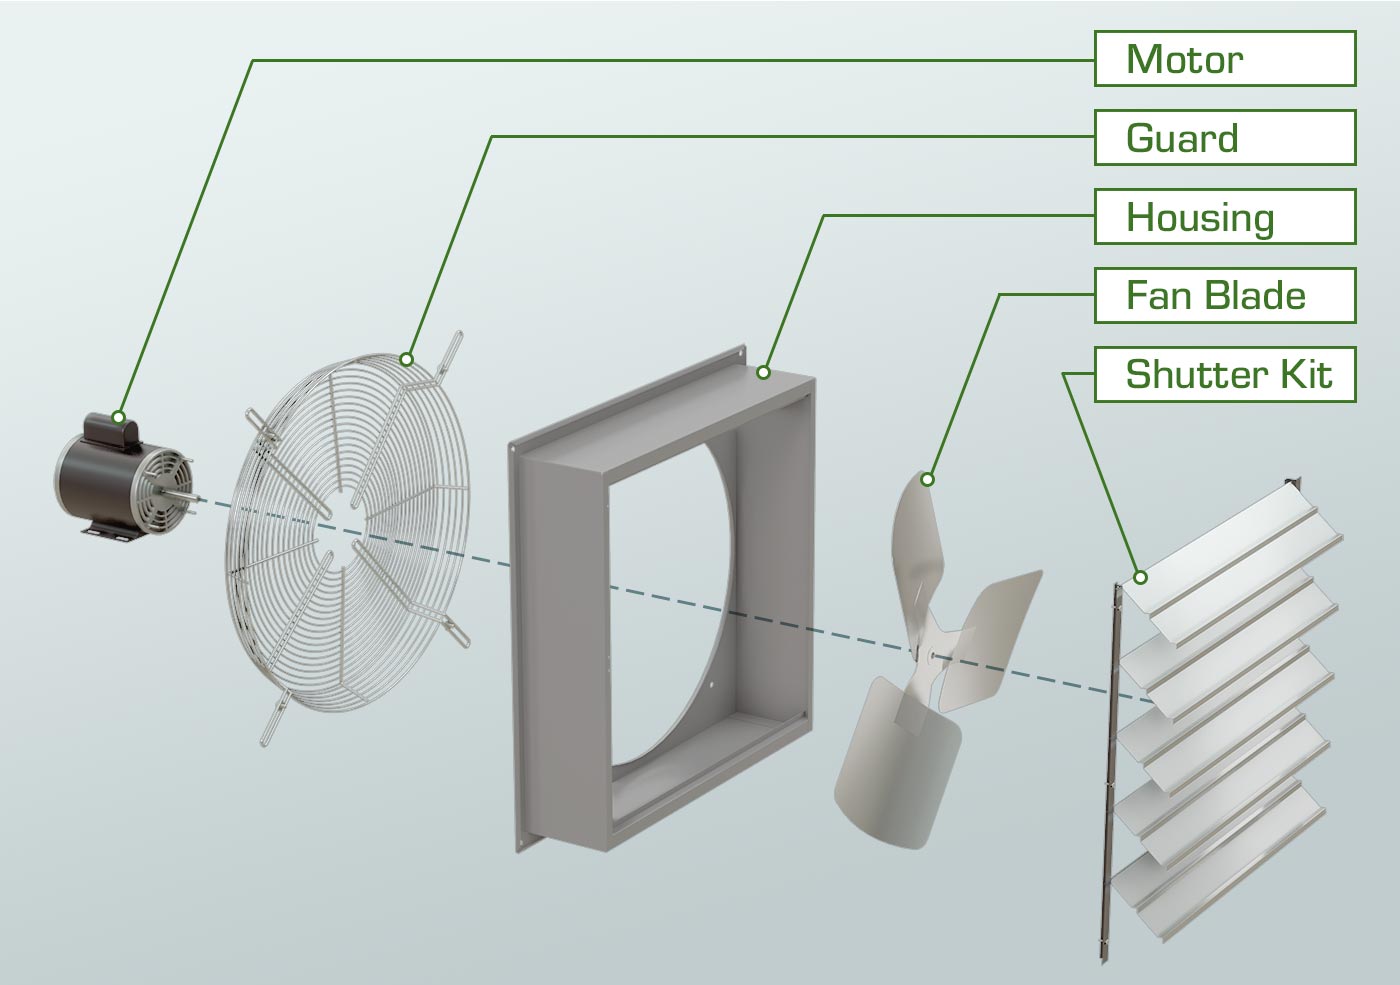 Exploded view of an SD fan with motor, guard, housing, fan blade and shutter kit.